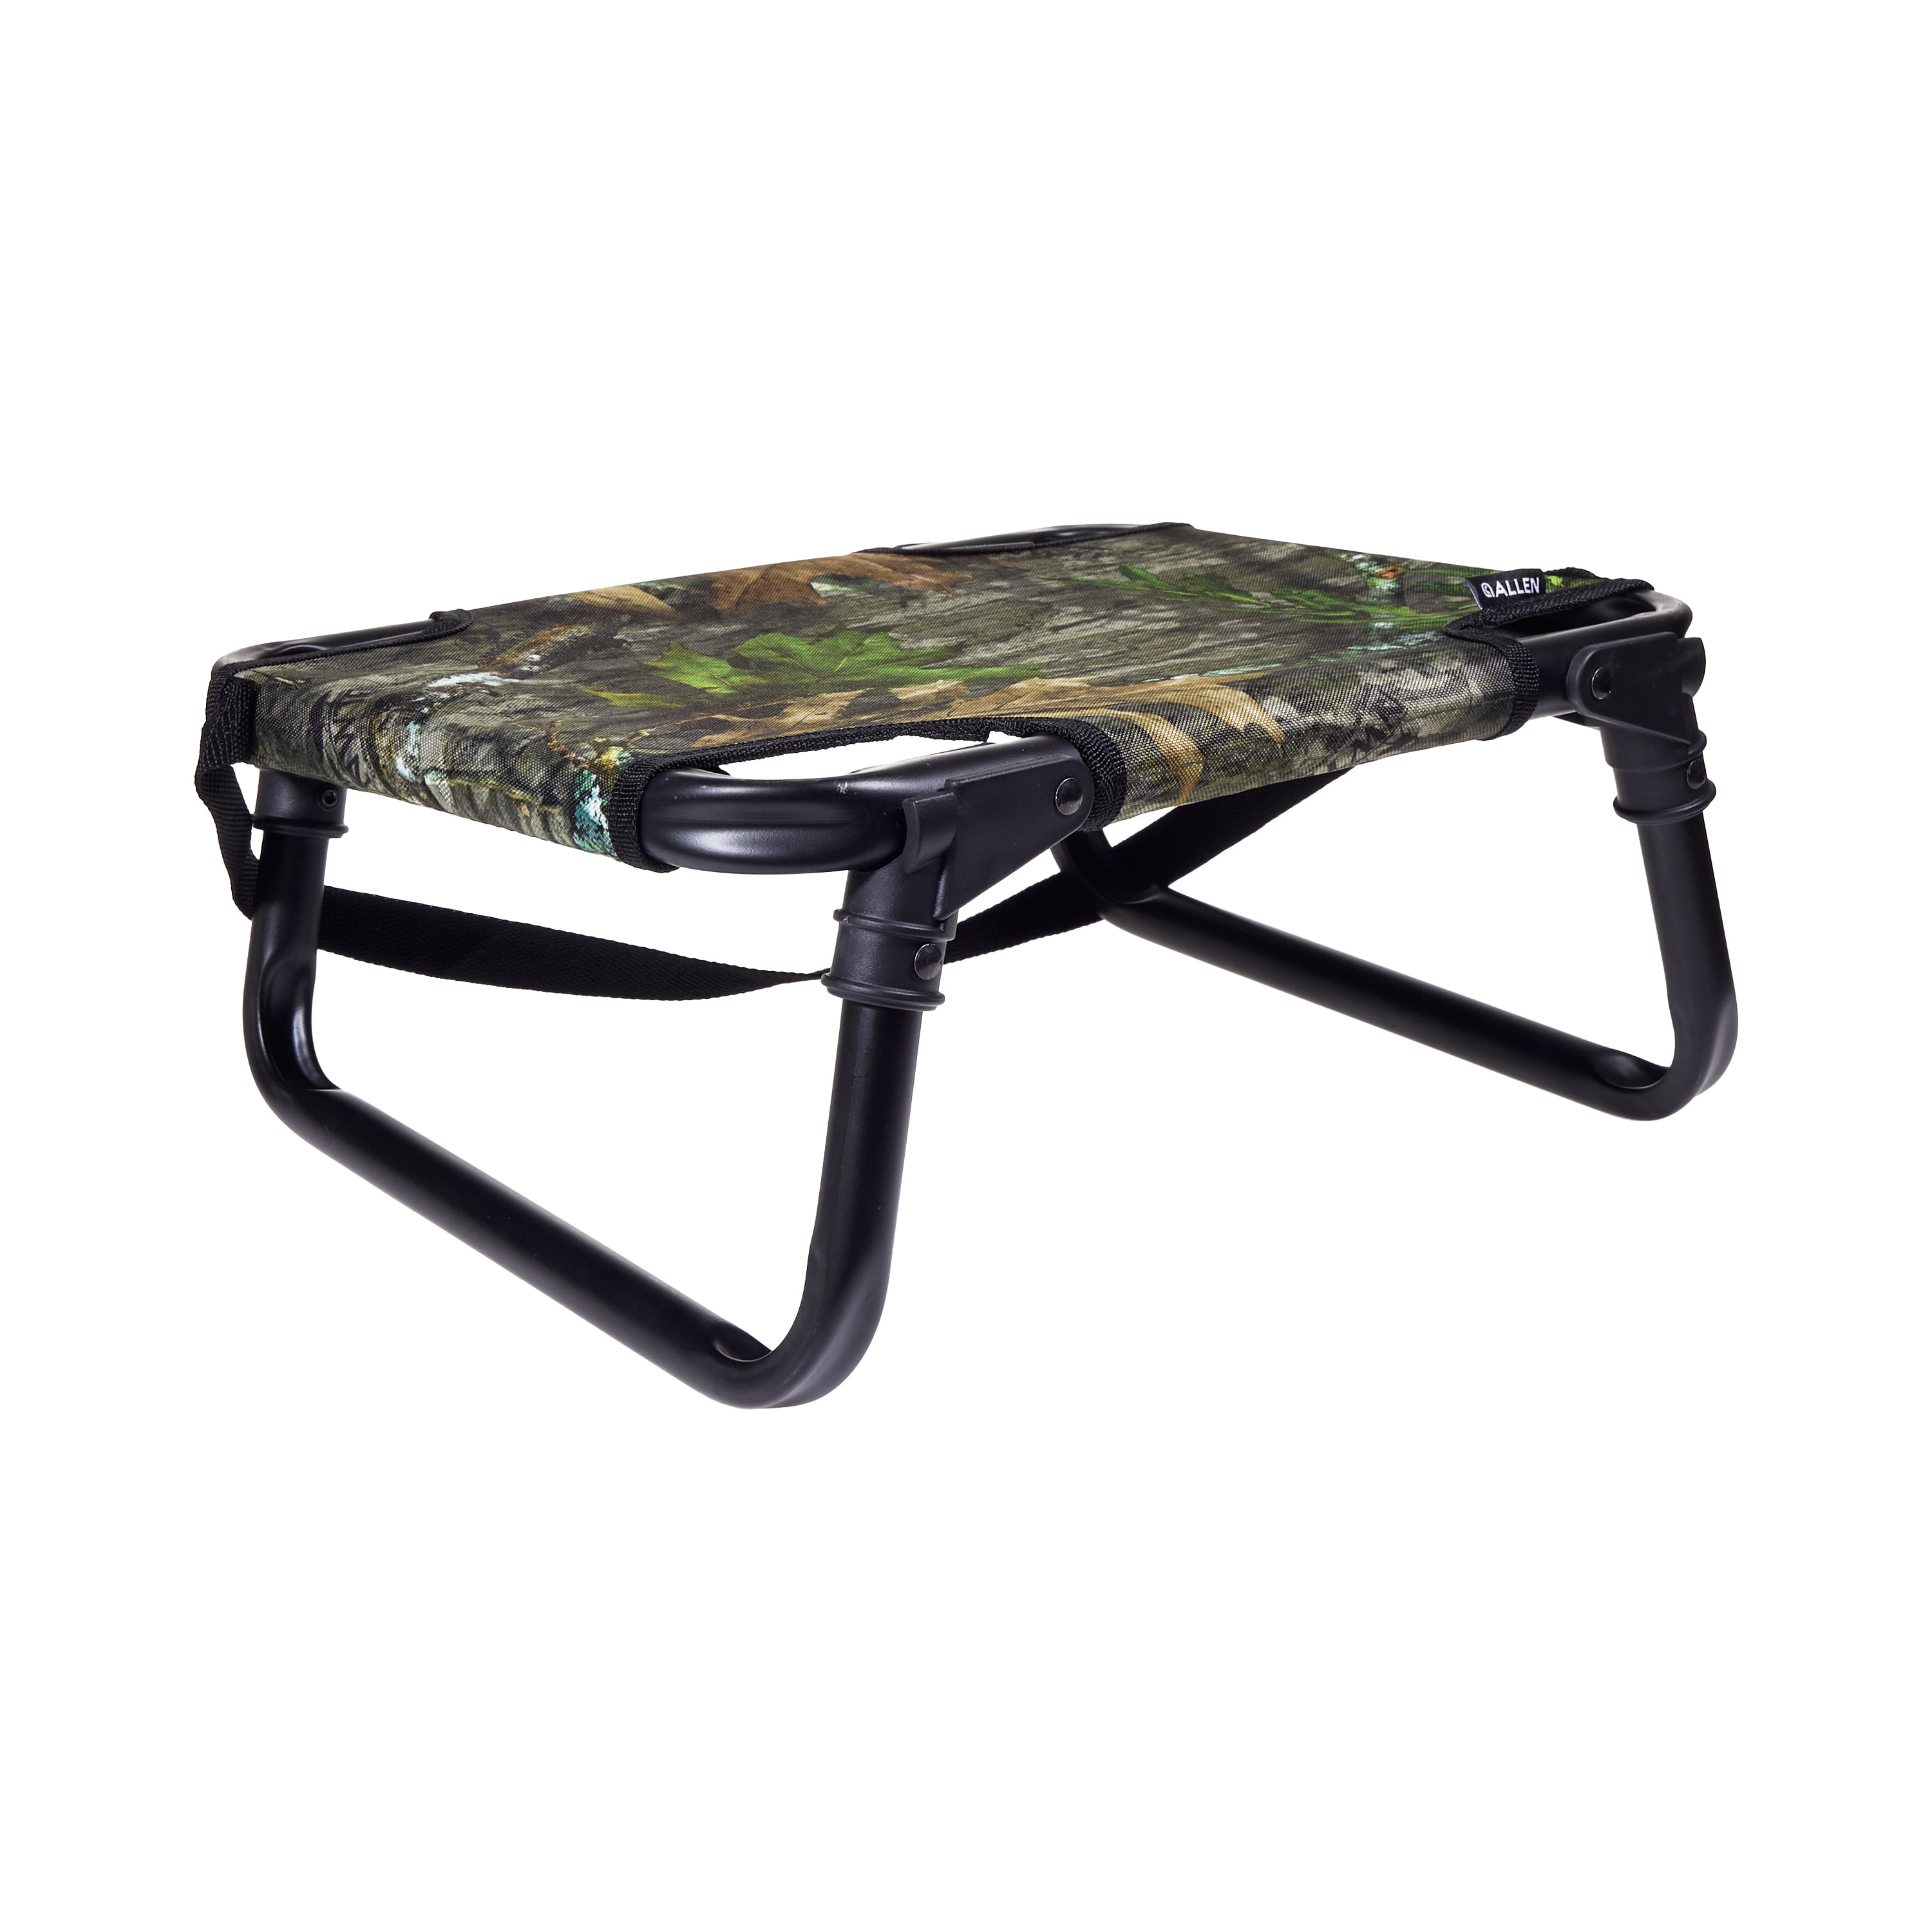 Walkstool Basic 20 in for sale online 